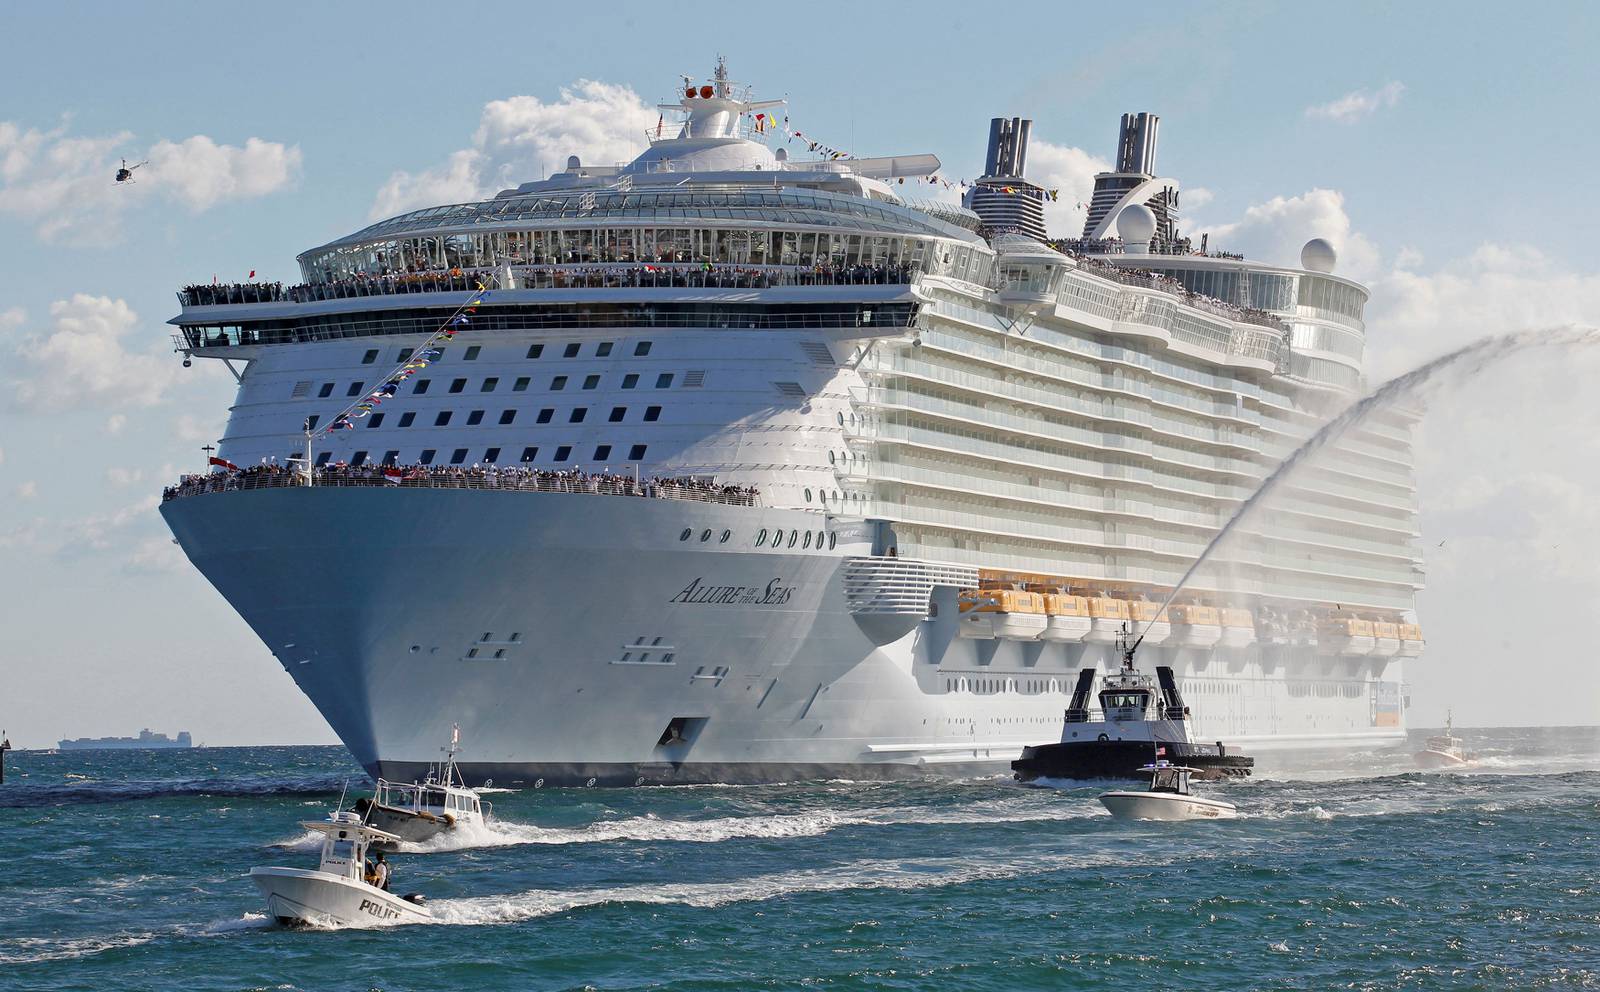 World's largest cruise ship 'Icon of the Seas' unveiled by Royal Caribbean